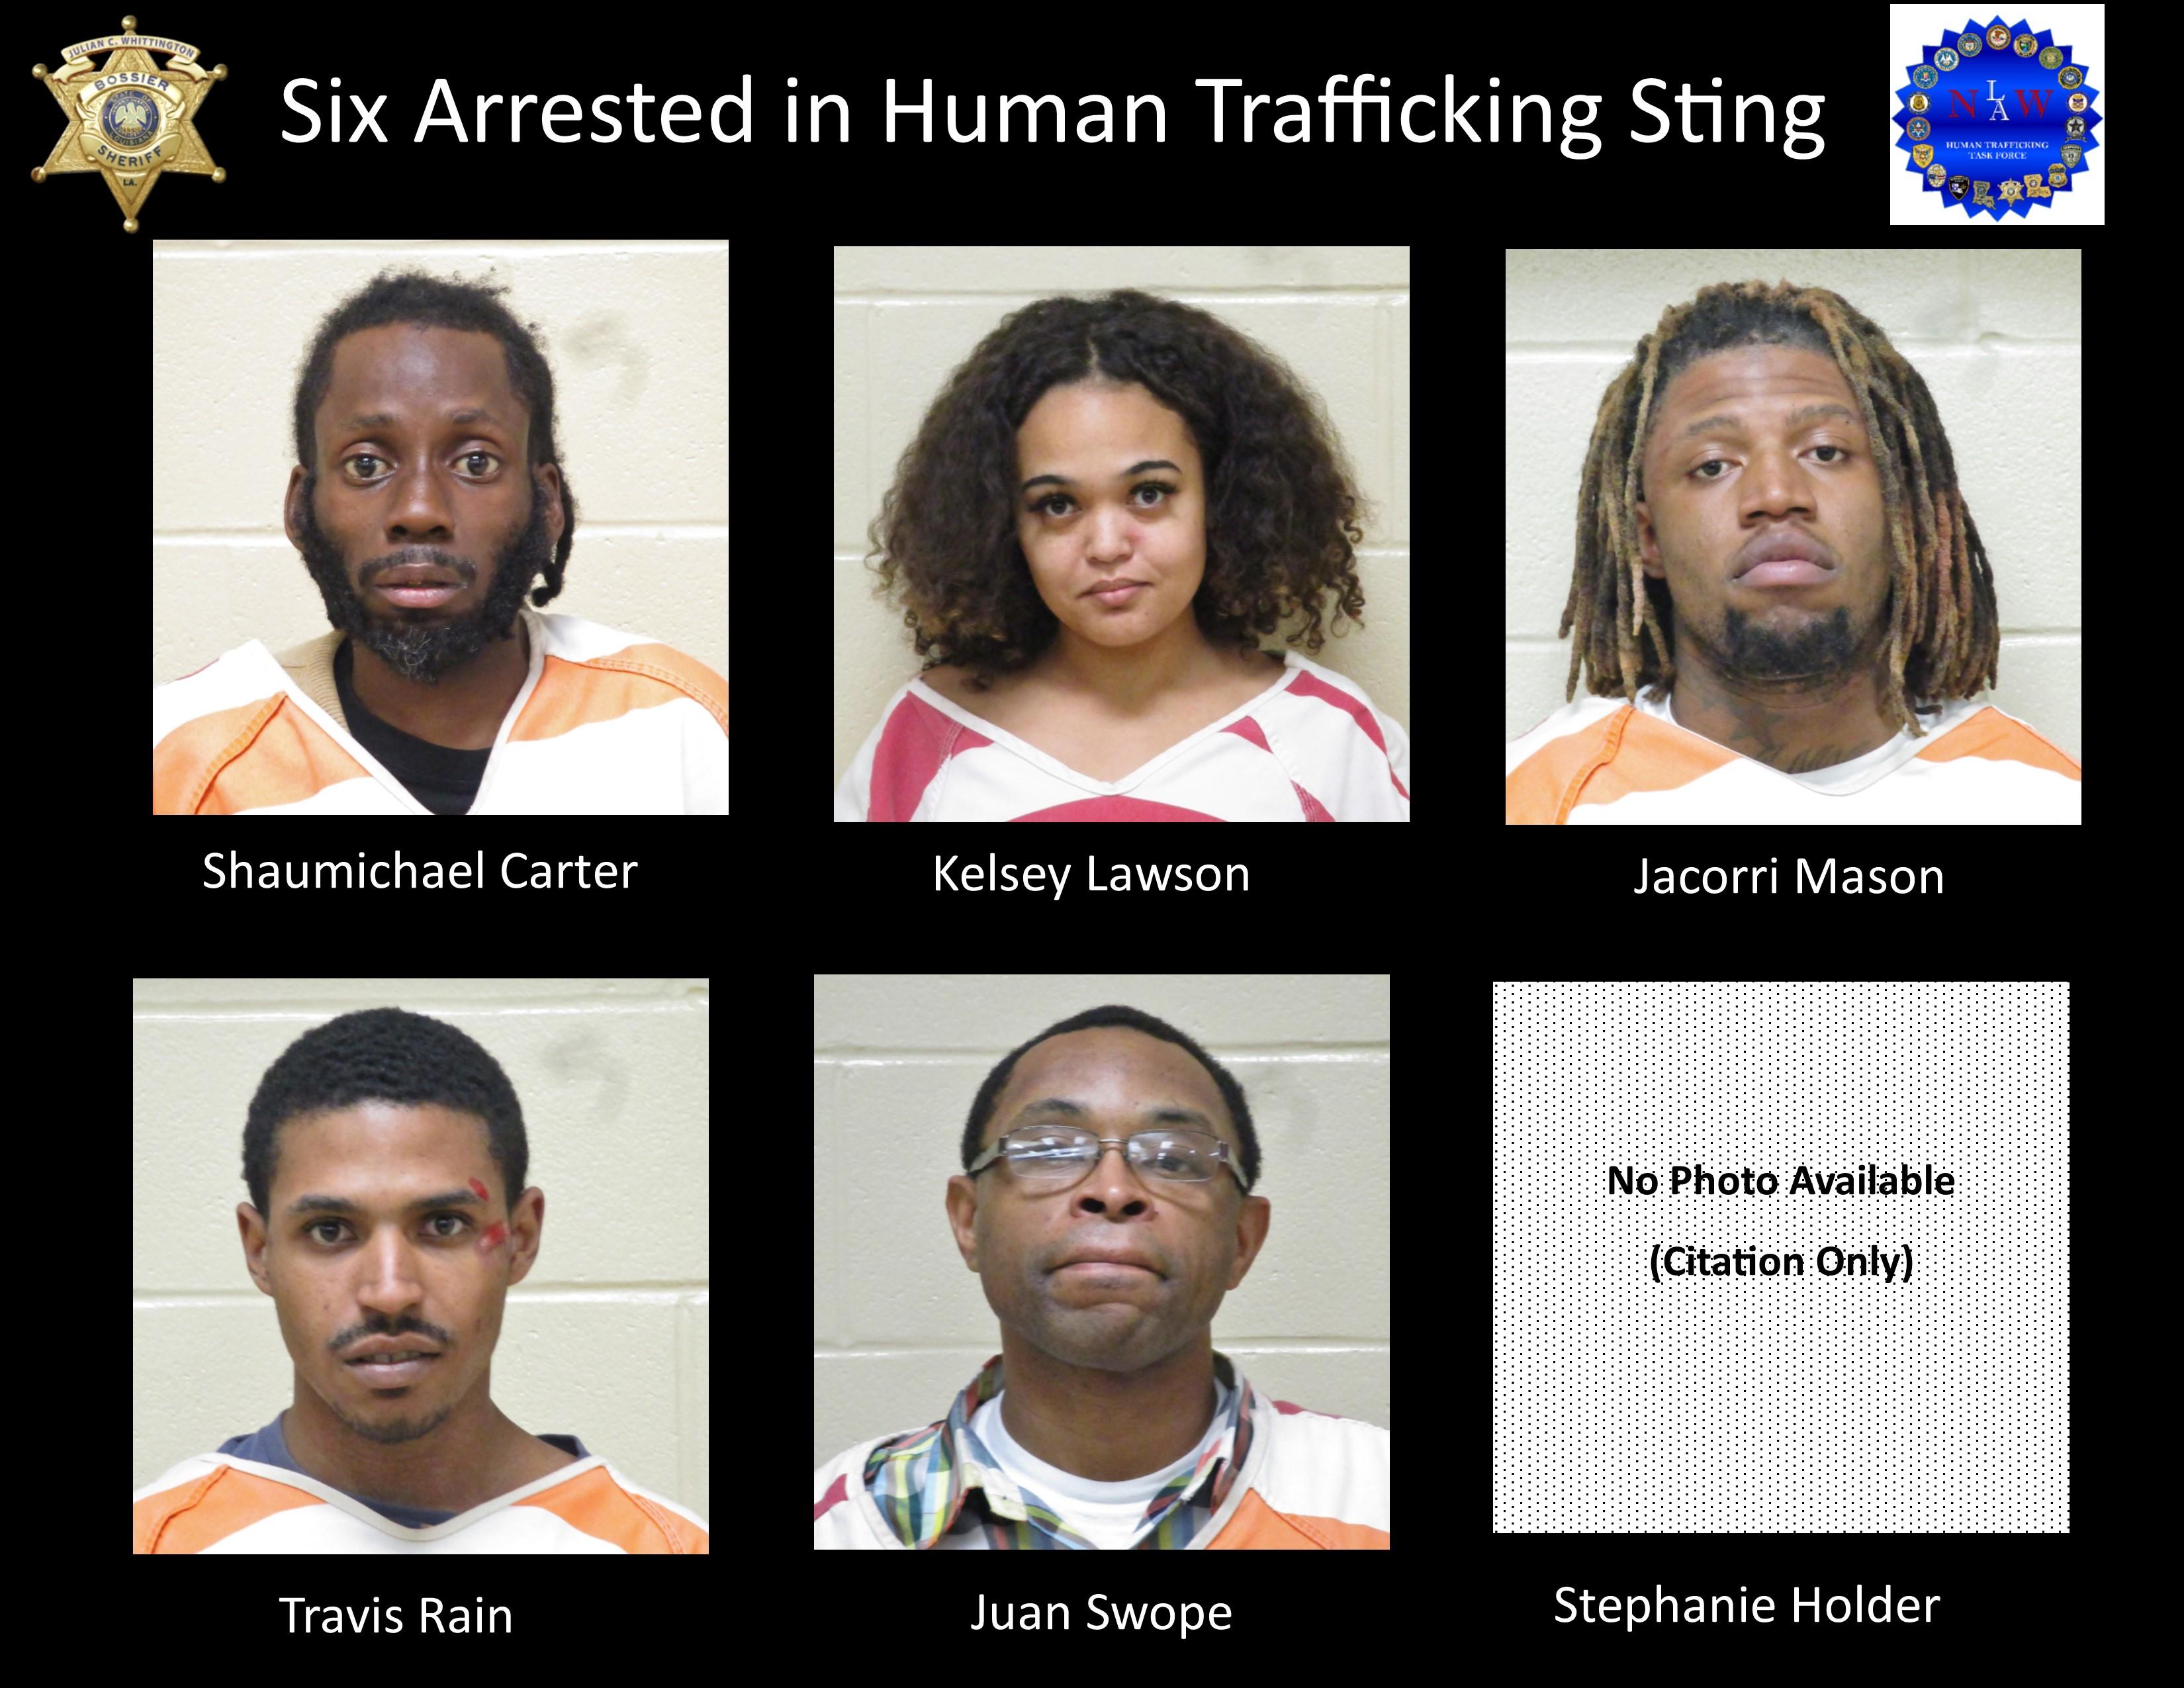 Six Arrested In Human Trafficking Sting The Inquisitor 3463